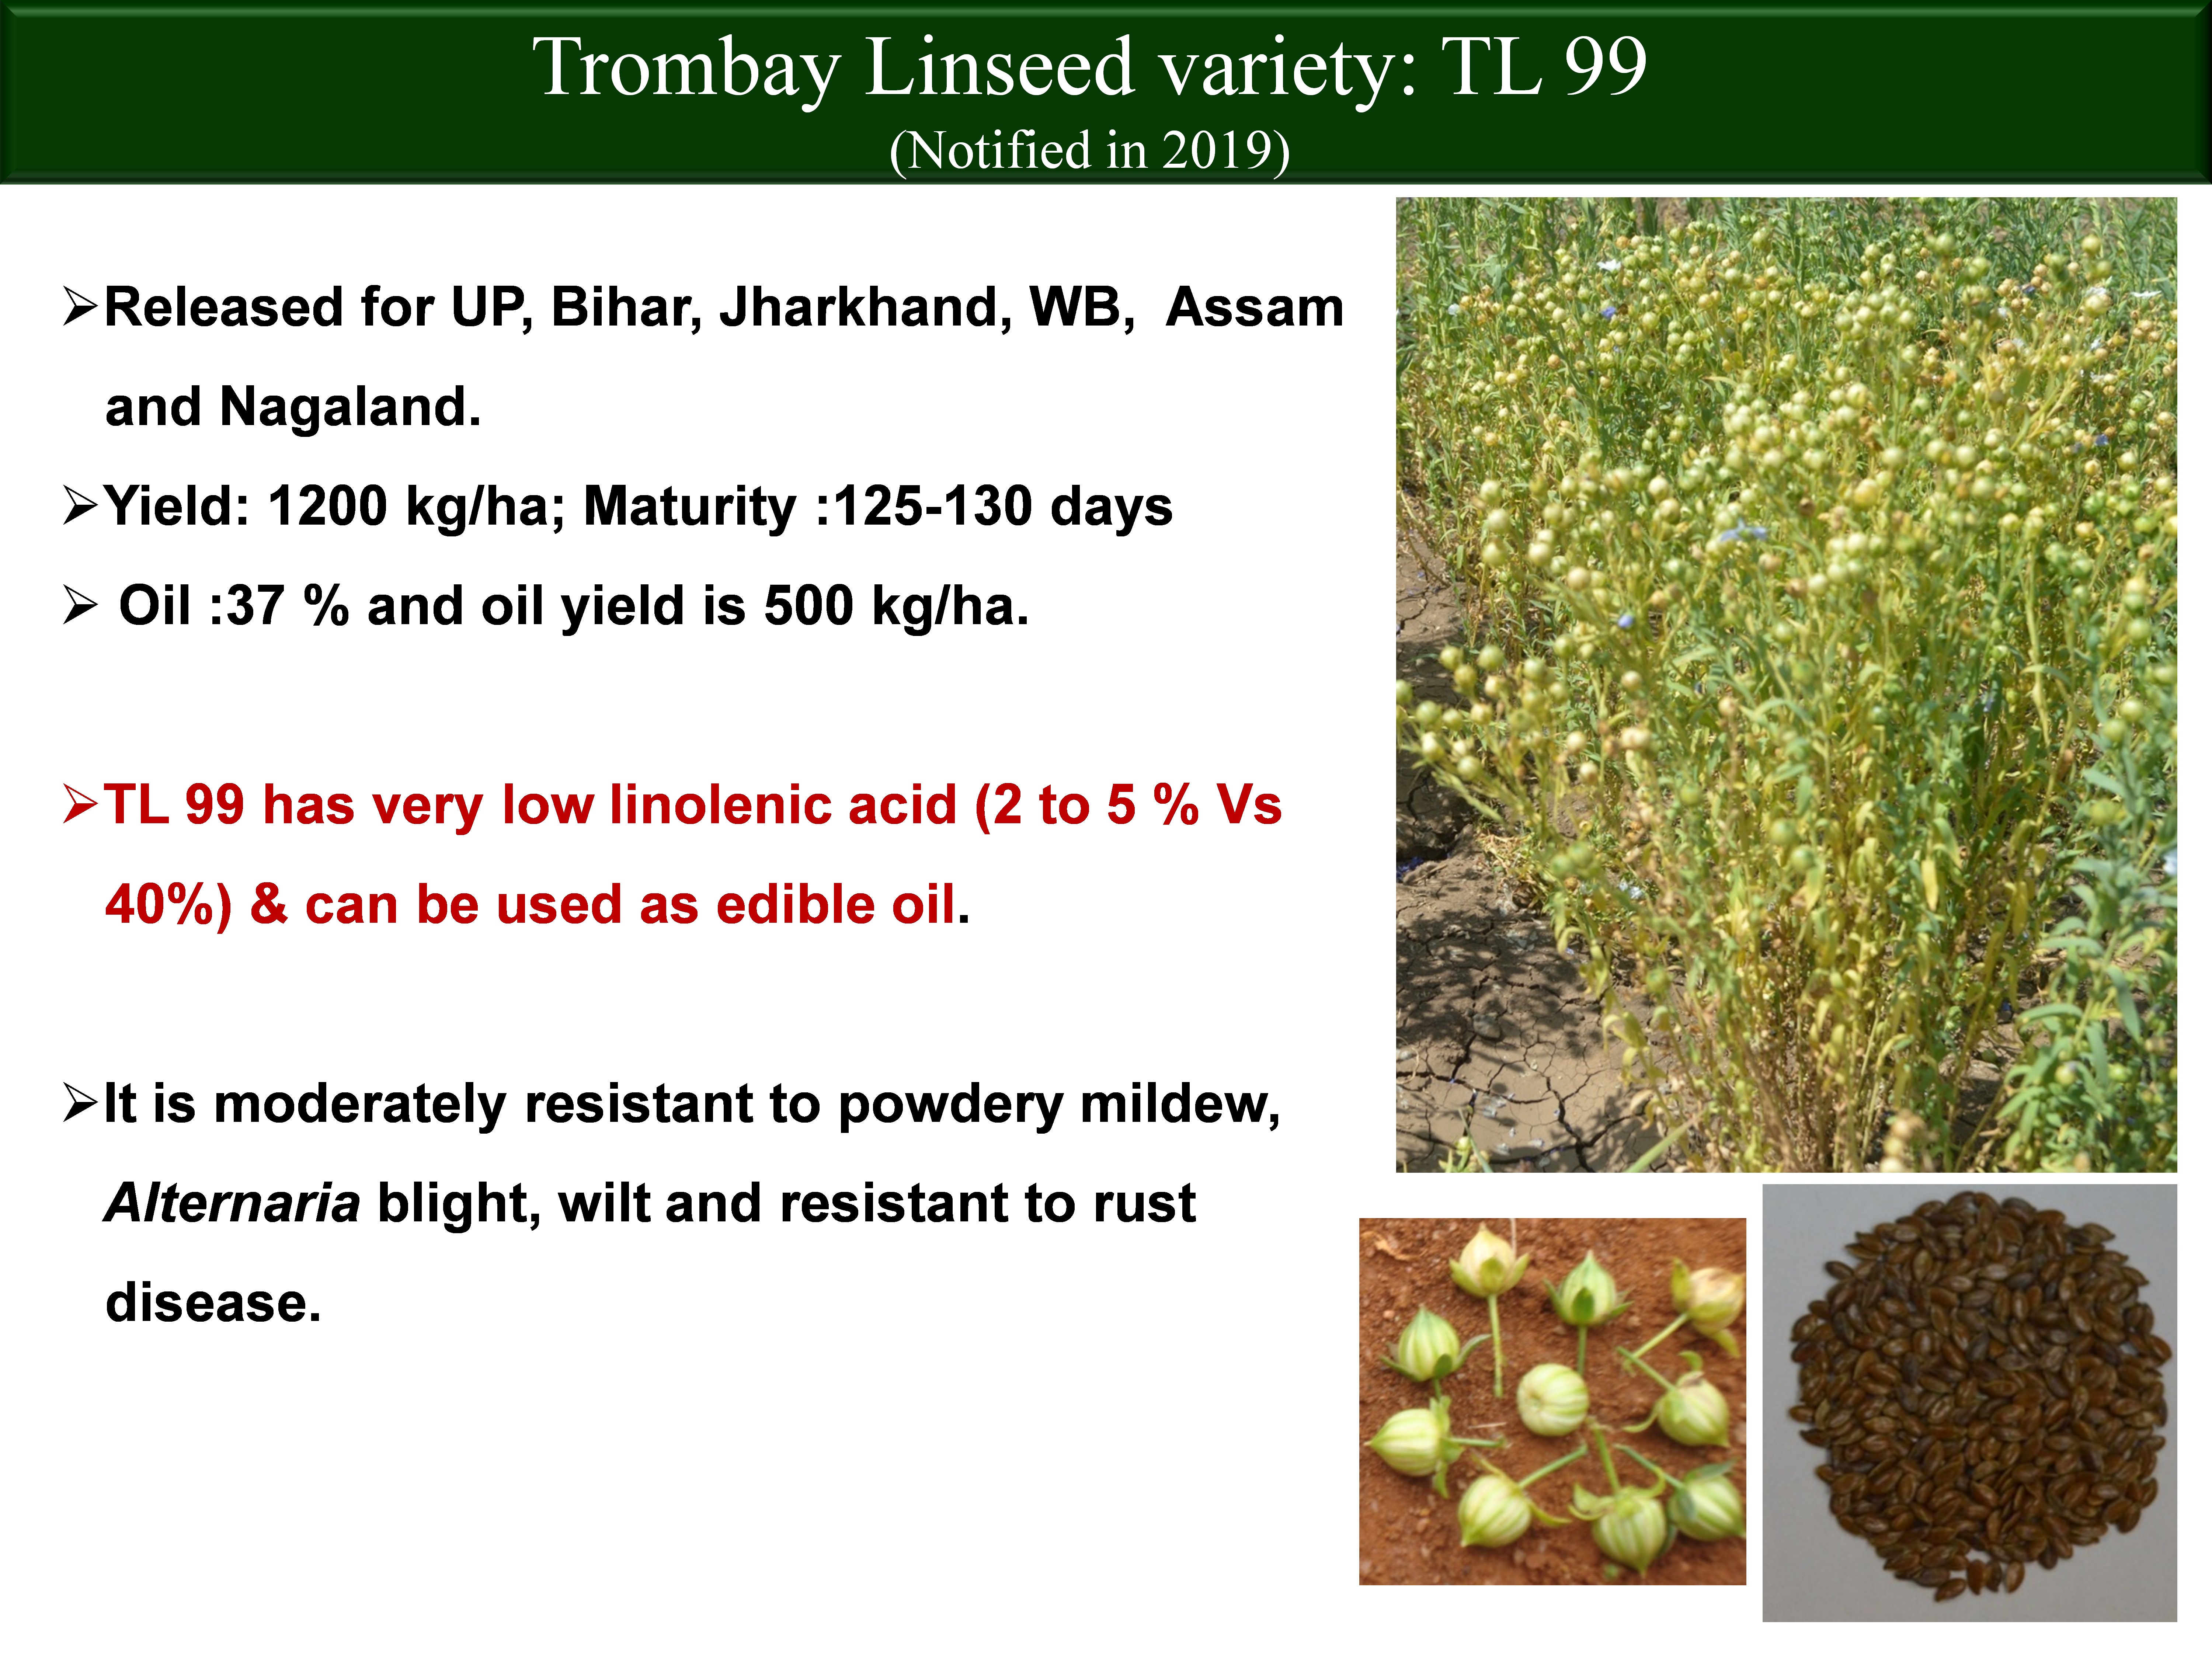 Trombay Linseed variety